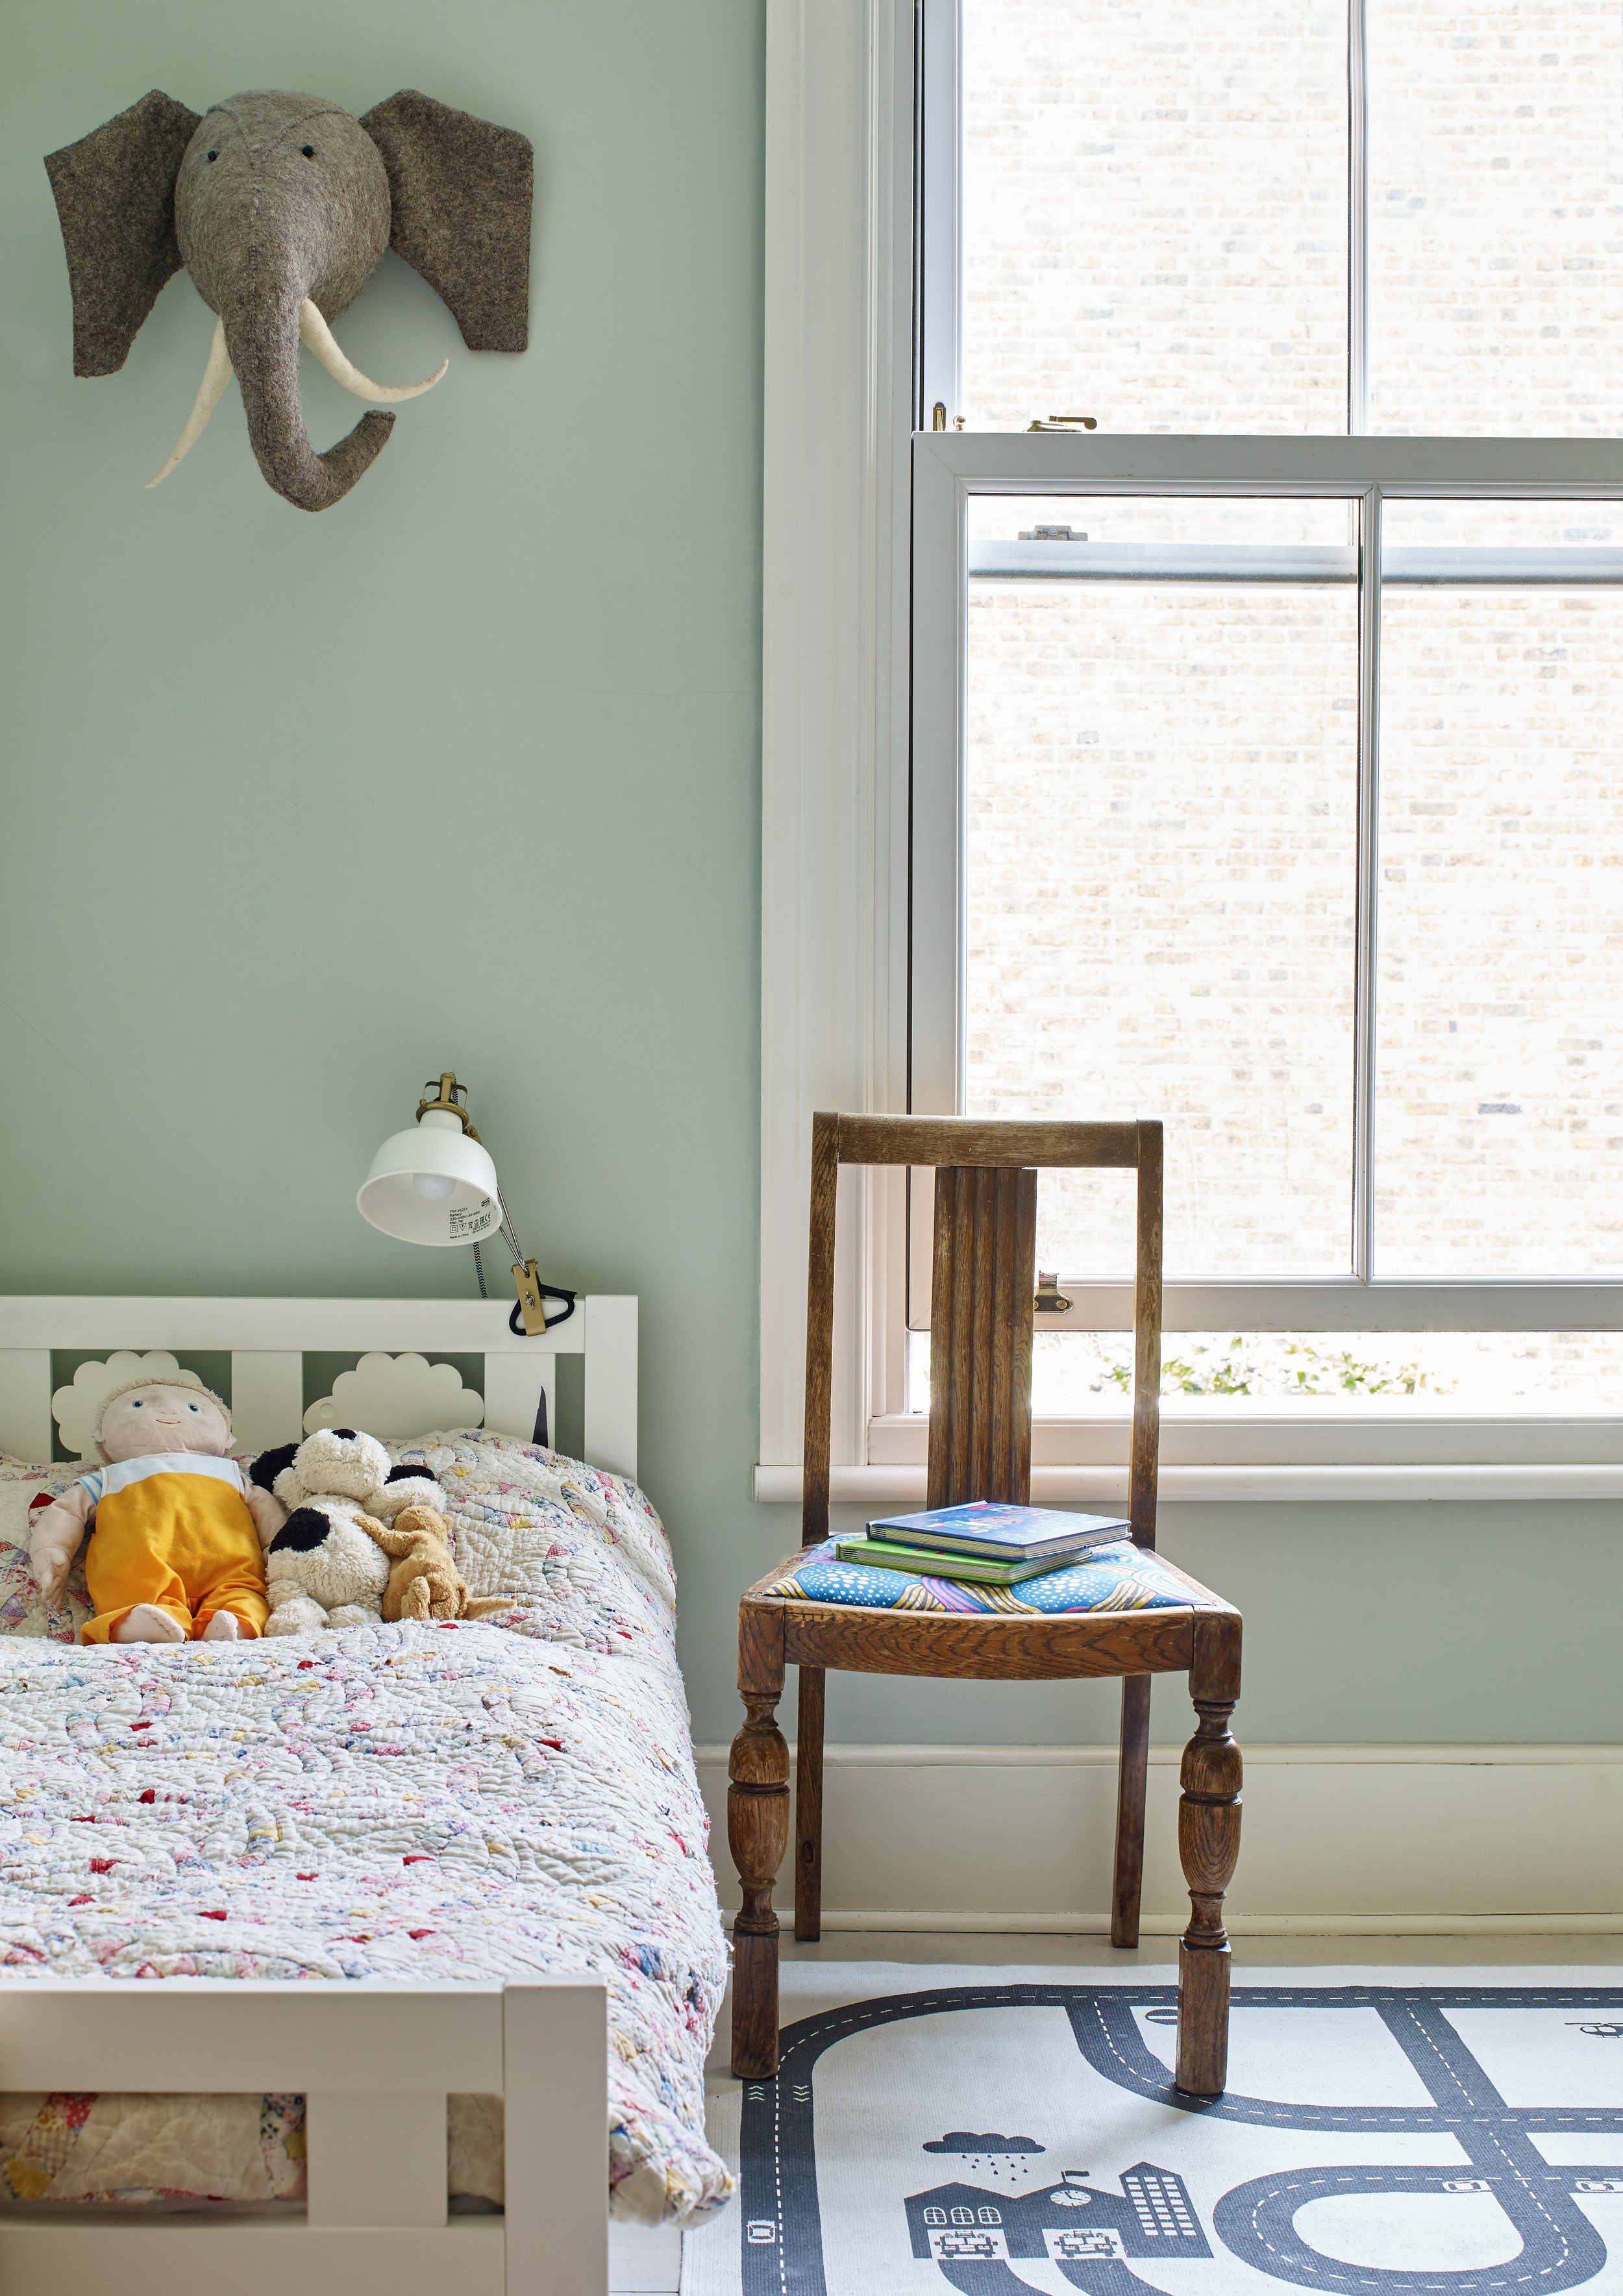 Child's bedroom with pale green paint and elephant head on wall